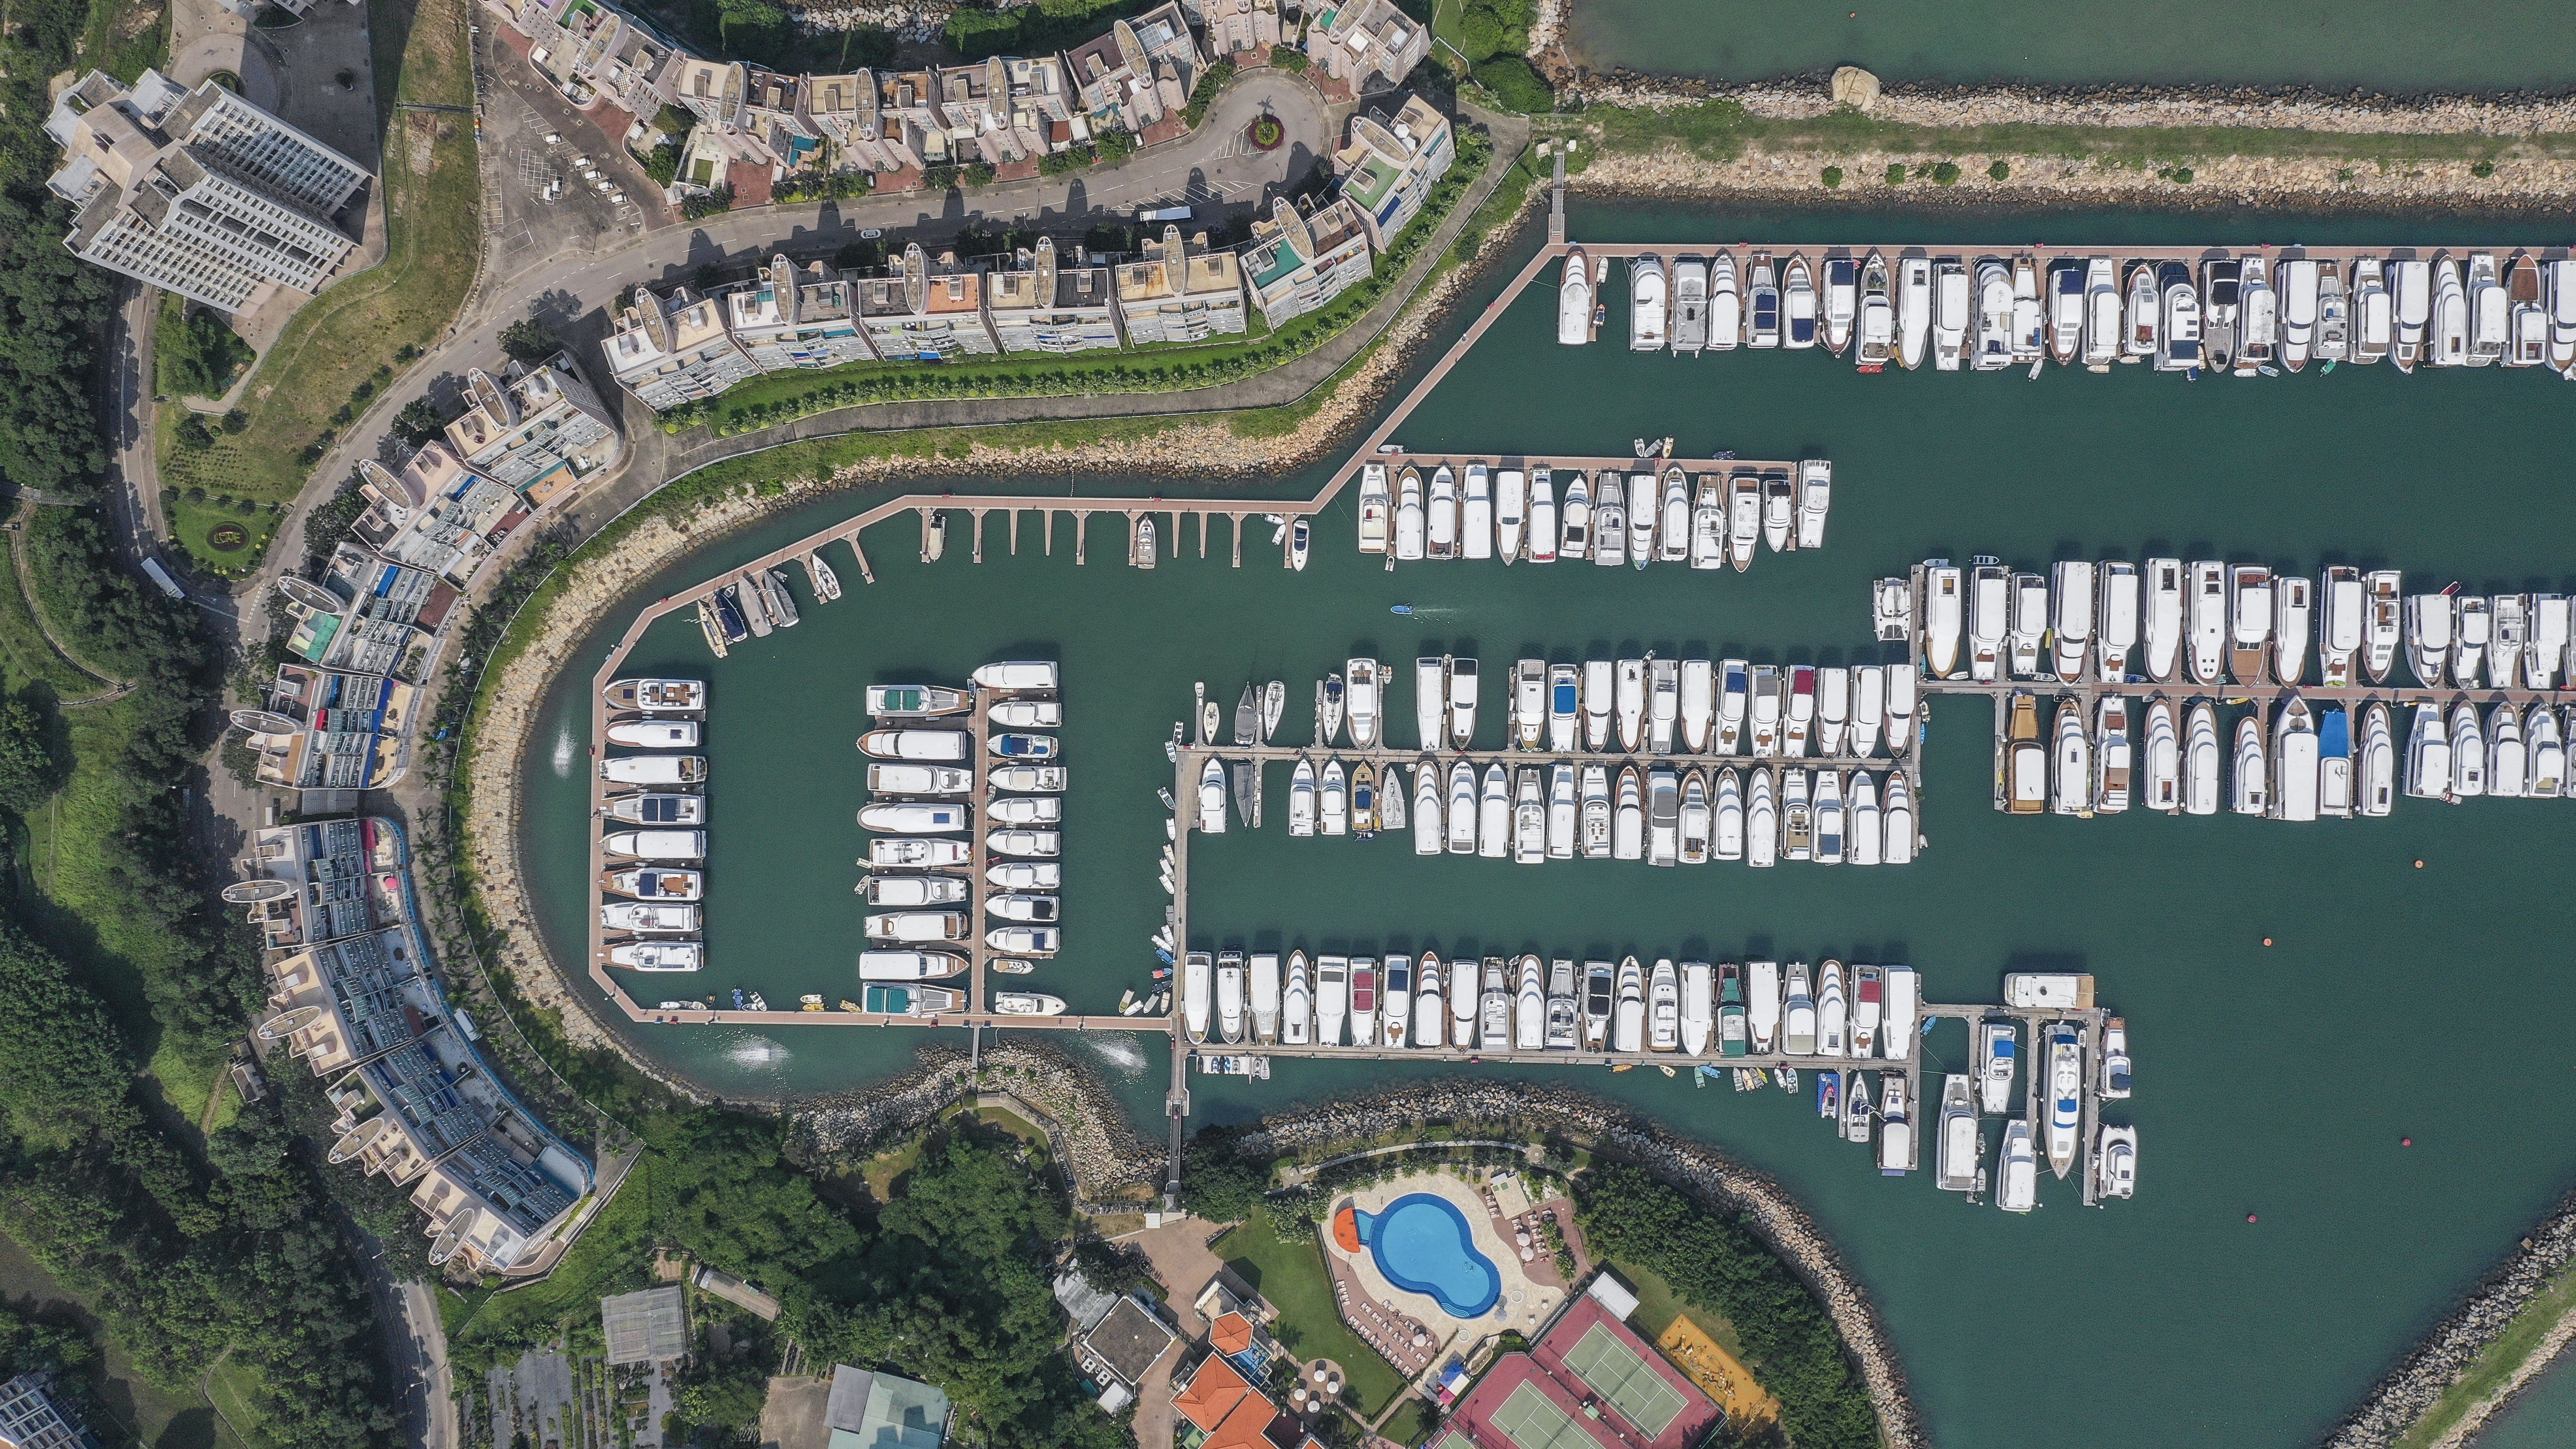 The marina began operations in 1989 and is next one of Hong Kong’s best-known private residential developments, Discovery Bay. Photo: Roy Issa